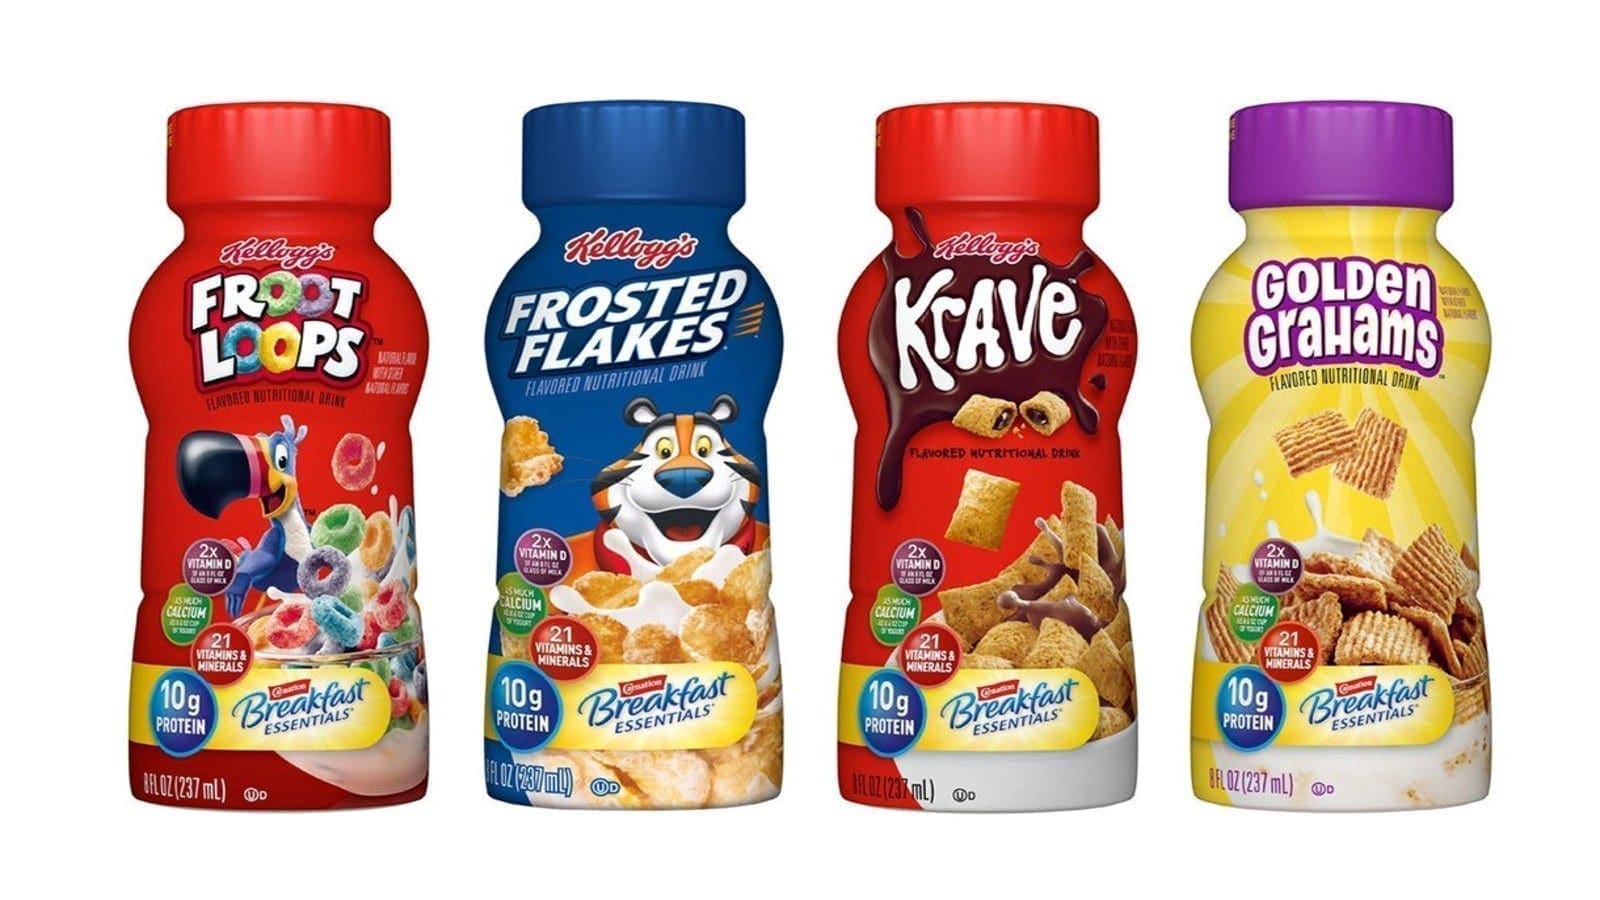 Nestlé adds beverages to iconic cereal brand, ramps up sustainability efforts in EMEA